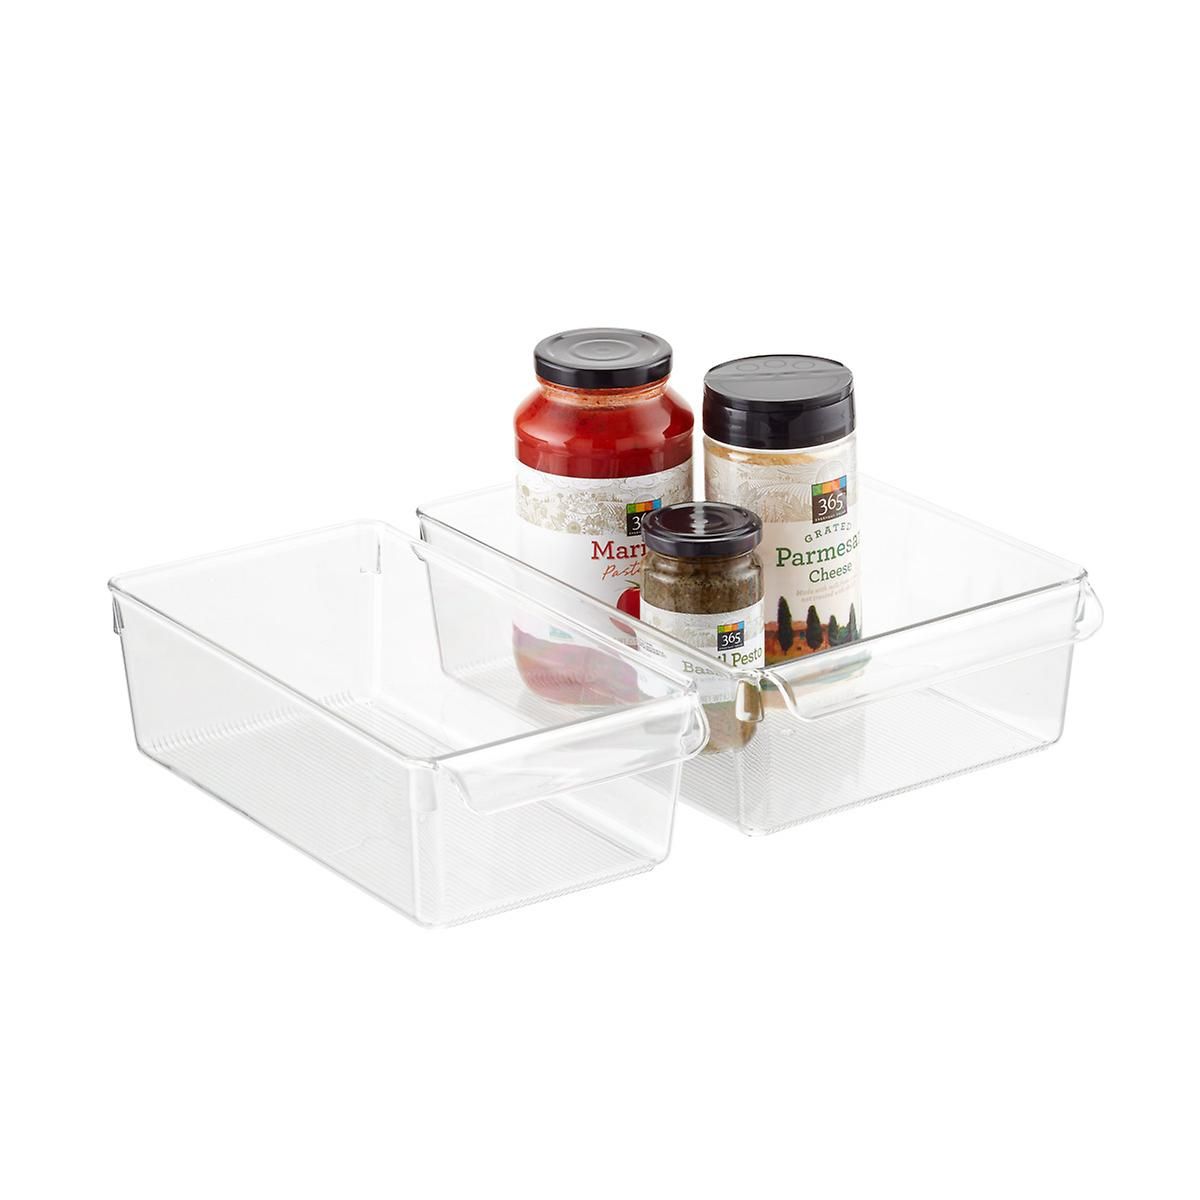 InterDesign Linus Open Cabinet Organizers | The Container Store